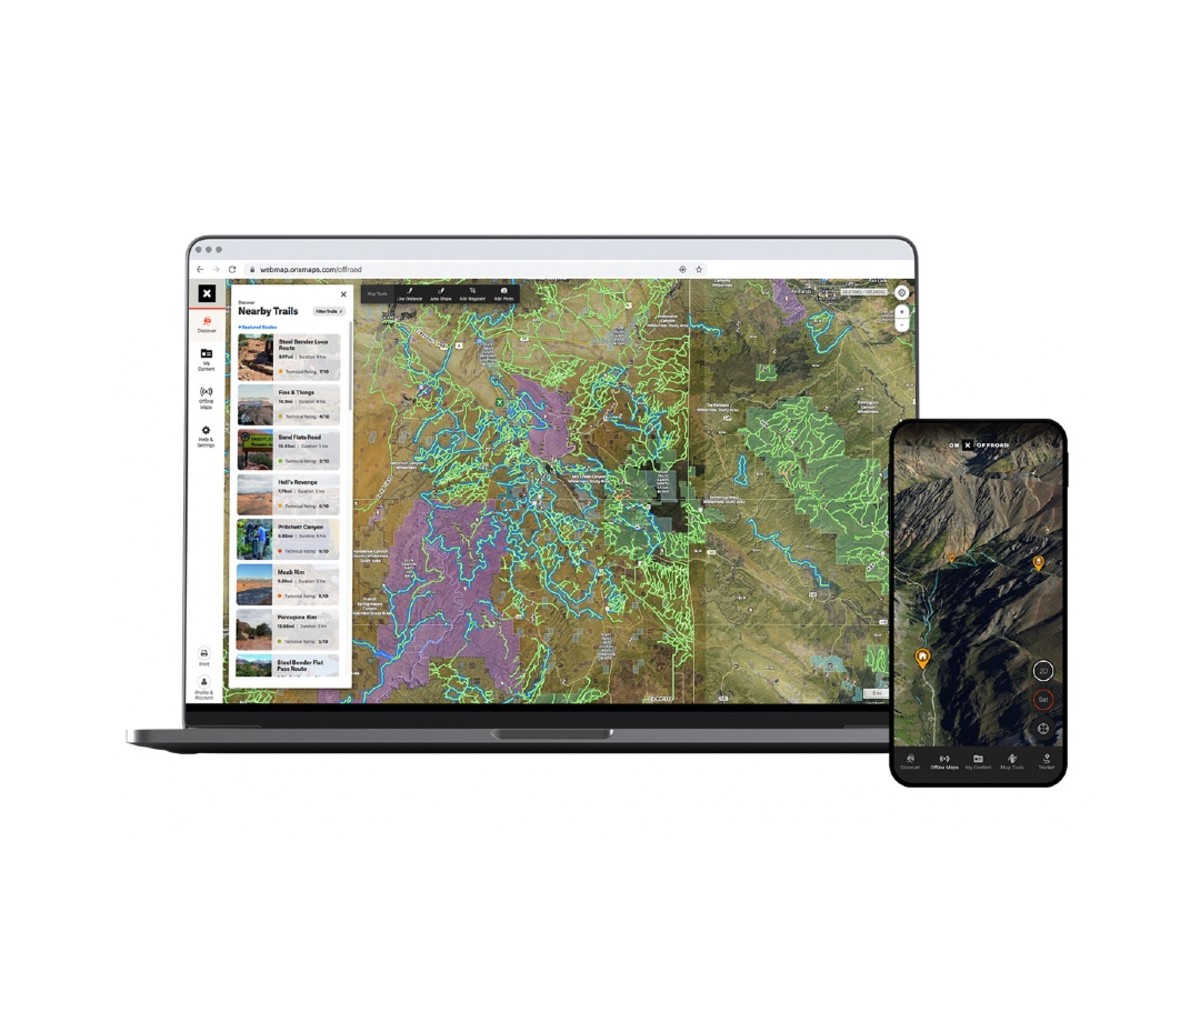 The onX map app gives you lots of great backcountry info for finding camping spots.